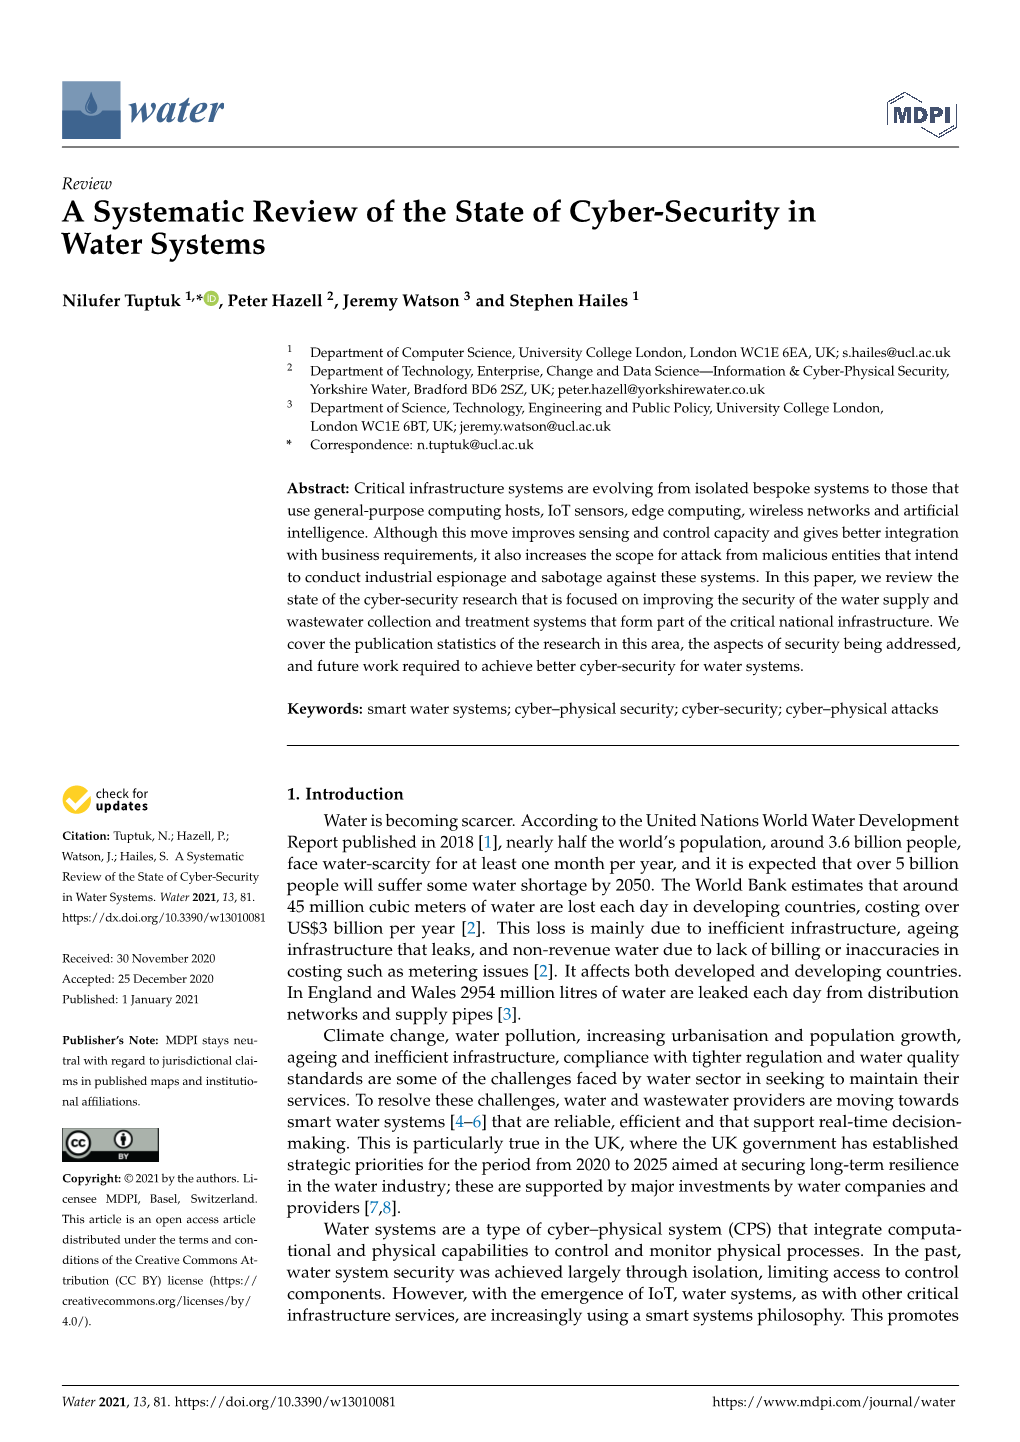 A Systematic Review of the State of Cyber-Security in Water Systems